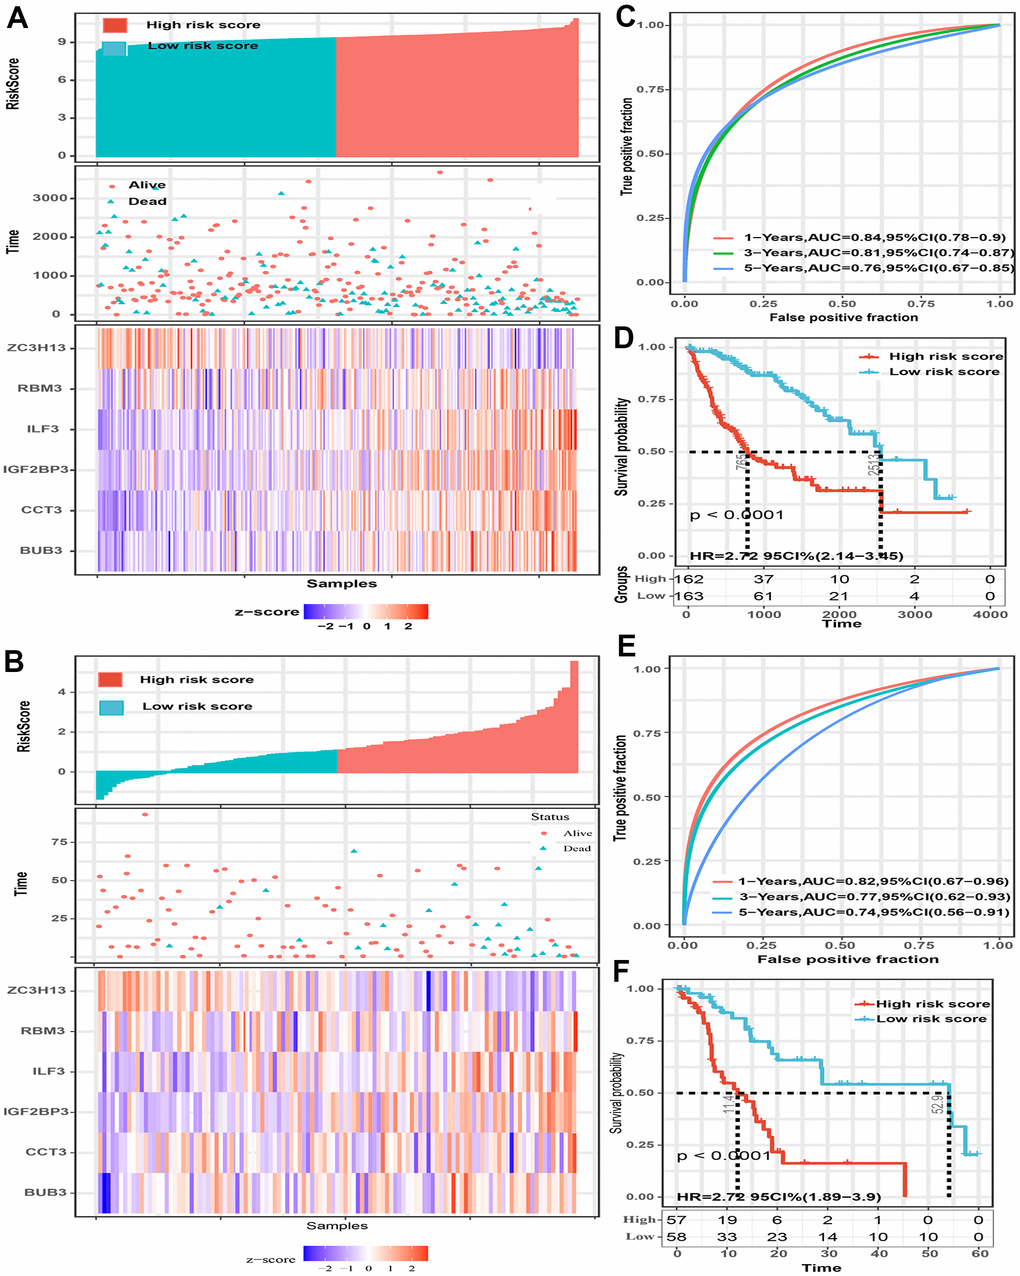 The predictive value of the six-spliceosome-related gene signature was validated in two validation sets (TCGA and GSE76427 cohorts). (A, B) HCC patients were divided into high-risk and low-risk score groups based on the median risk score in the TCGA cohort (A) and GSE76427 cohort (B); HCC patients were divided into high-risk and low-risk score groups based on the median risk score; High-risk score groups had lower survival rates than patients in low-risk score groups; Patients in high-risk score groups have lower ZC3H13 mRNA expression, whereas higher RBM3, ILF3, IGF2BP3, CCT3, and BUB3 mRNA levels. (C) 1-, 3-, and 5-year time-dependent receiver operating characteristic curve of the spliceosome-related genes signature in the TCGA cohort. (D) High-risk score patients have poorer overall survival probability in the TCGA cohort. (E) 1-, 3-, and 5-year time-dependent receiver operating characteristic curve of the spliceosome-related genes signature in the GSE76427 cohort. (F) High-risk score patients have poorer overall survival probability in GSE76427 cohort.